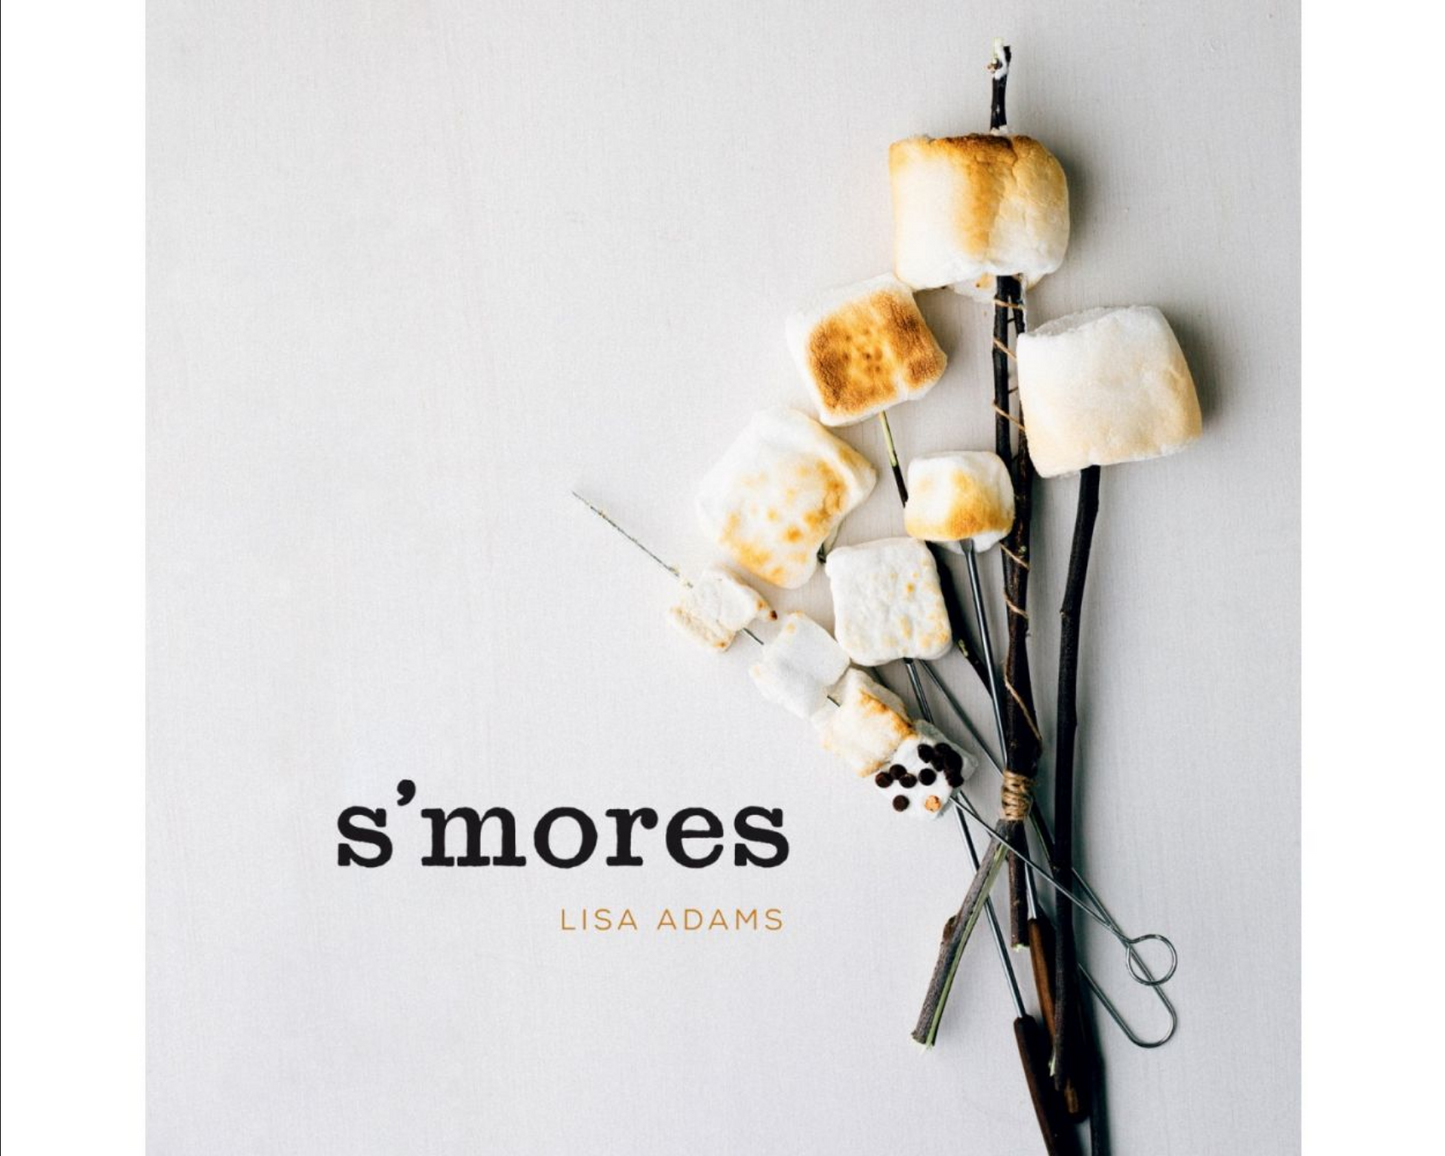 S'mores cover